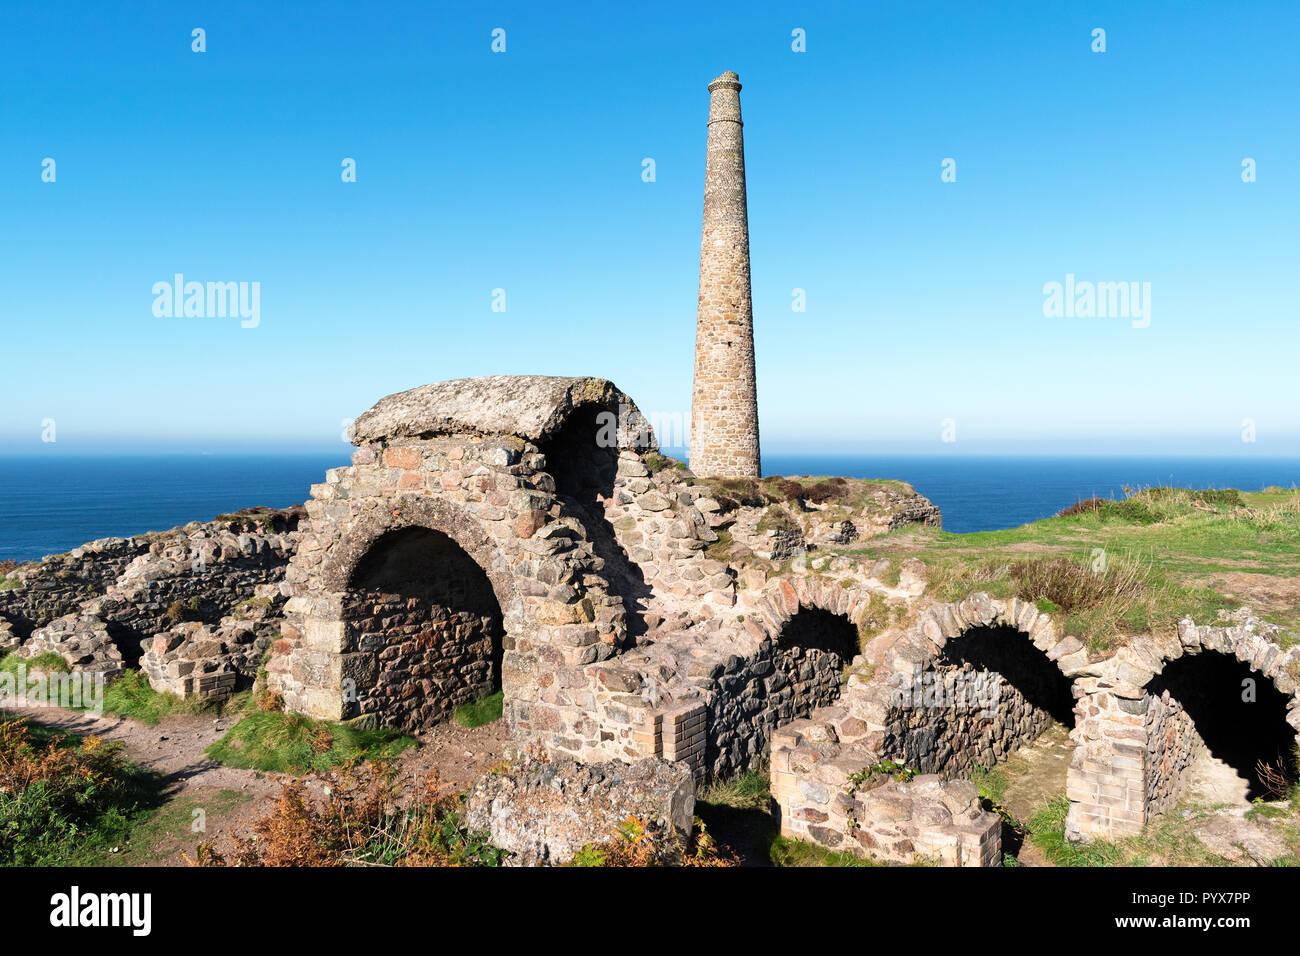 abandoned arsenic calciner labrynth works at the old botallack tin mine near pendeen in cornwall, england, britain, uk. Stock Photo